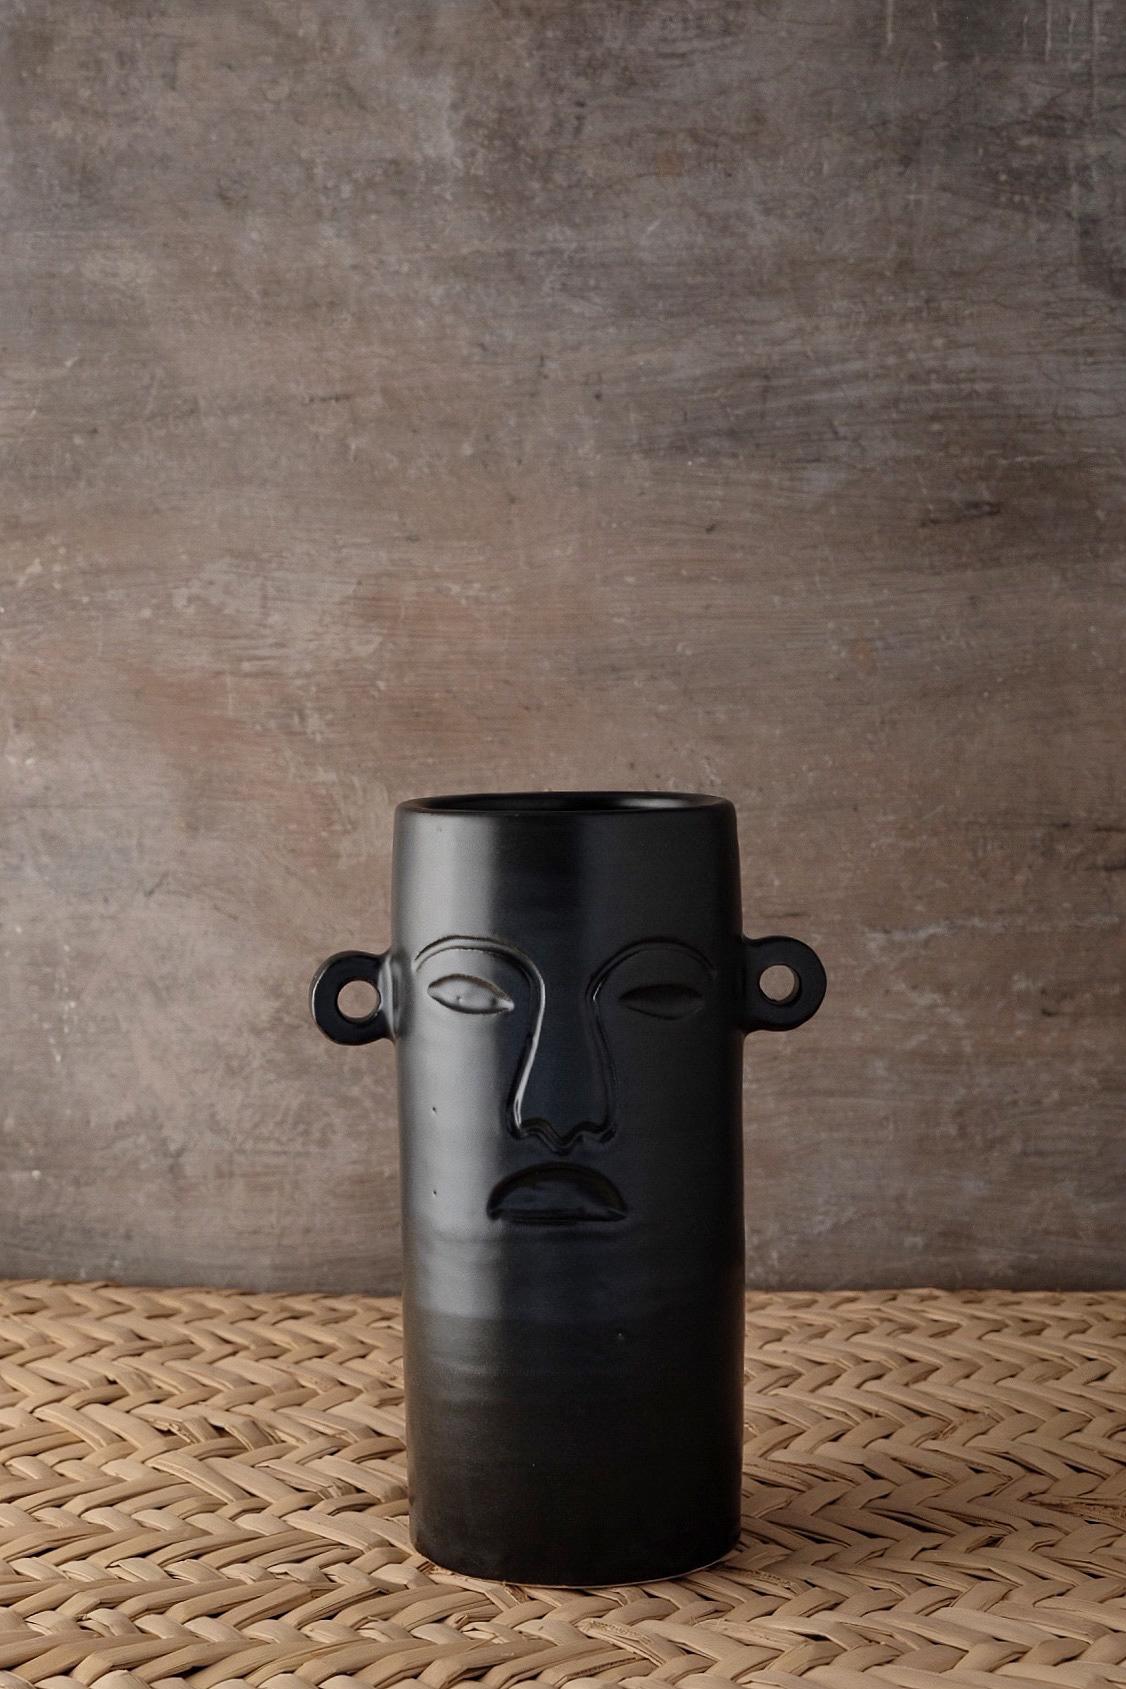 Xochipilli vase by Onora
Dimensions: D 12 x 25 cm
Materials: Ceramic
Available in black, white and sand.

This ceramic vase refers pre-hispanic ceremonial masks. Molded by artisans from the State of Mexico.

This collection reinterprets one